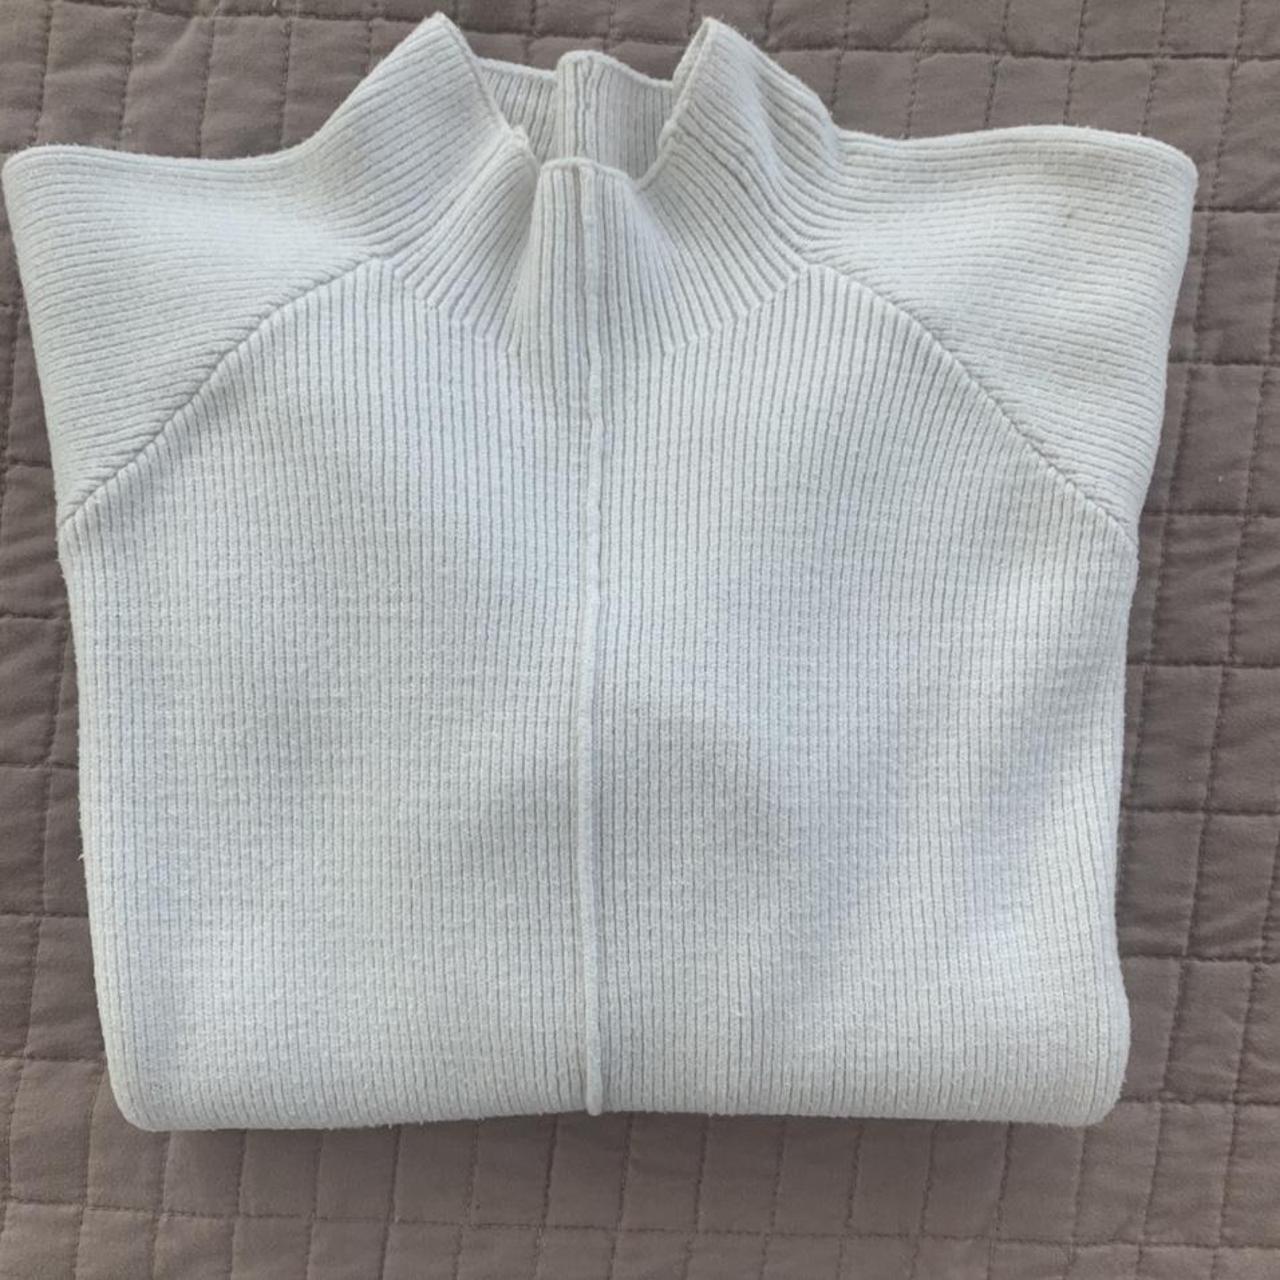 Wool knitwear sweater. Very good quality Excellent... - Depop